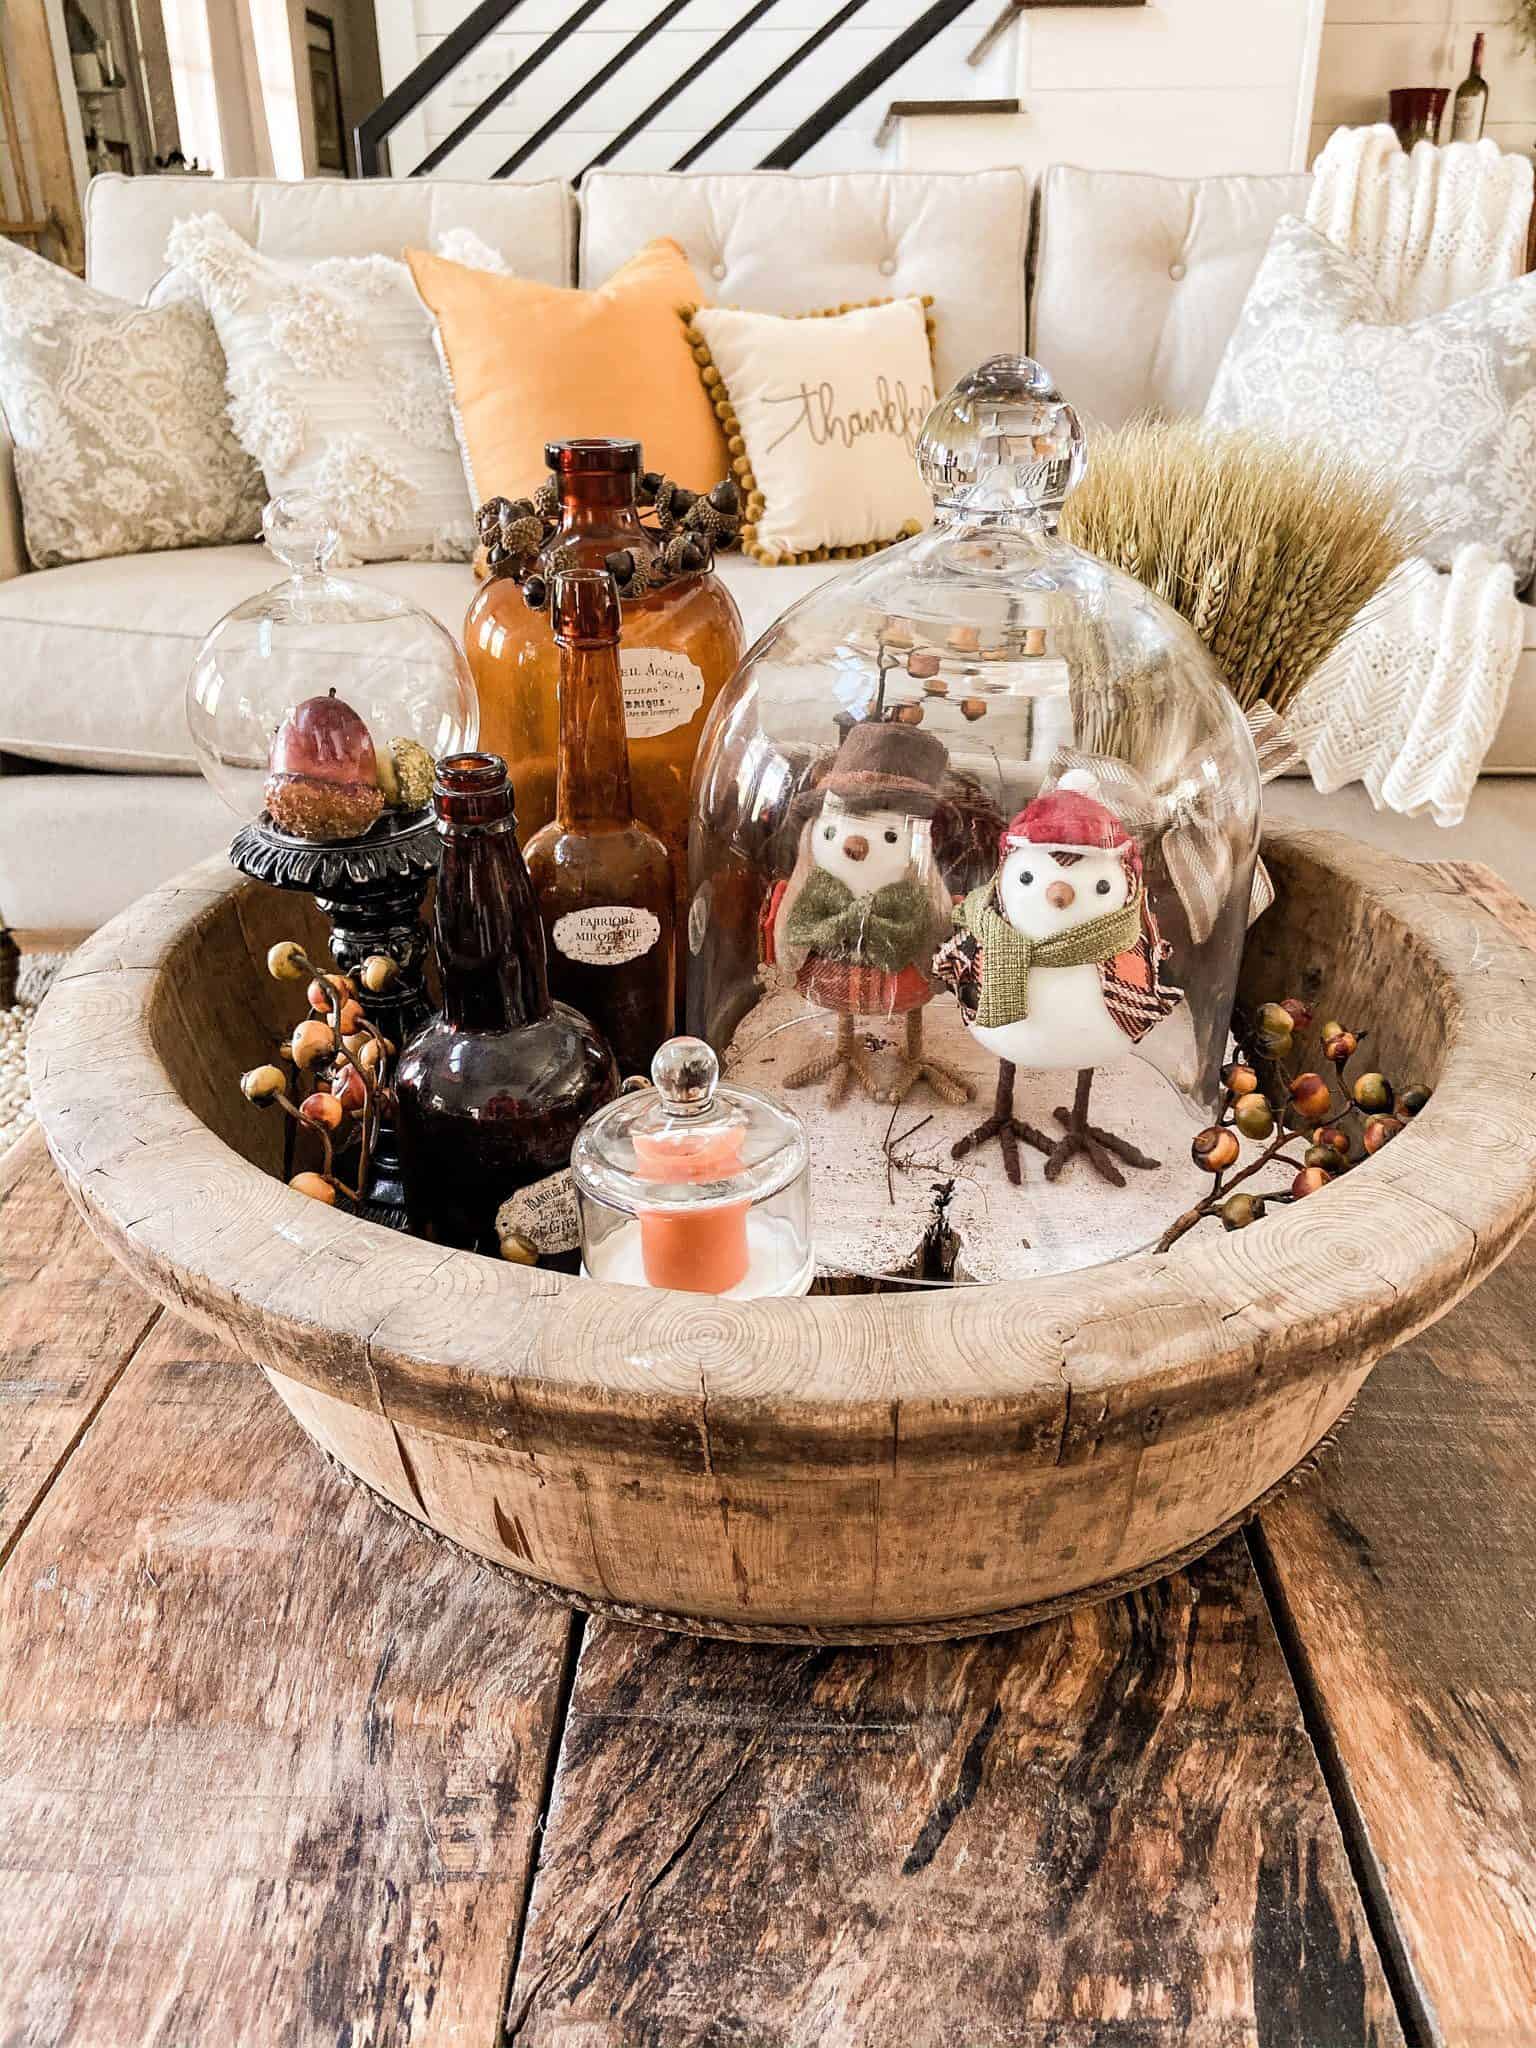 How to Decorate with Glass Cloches